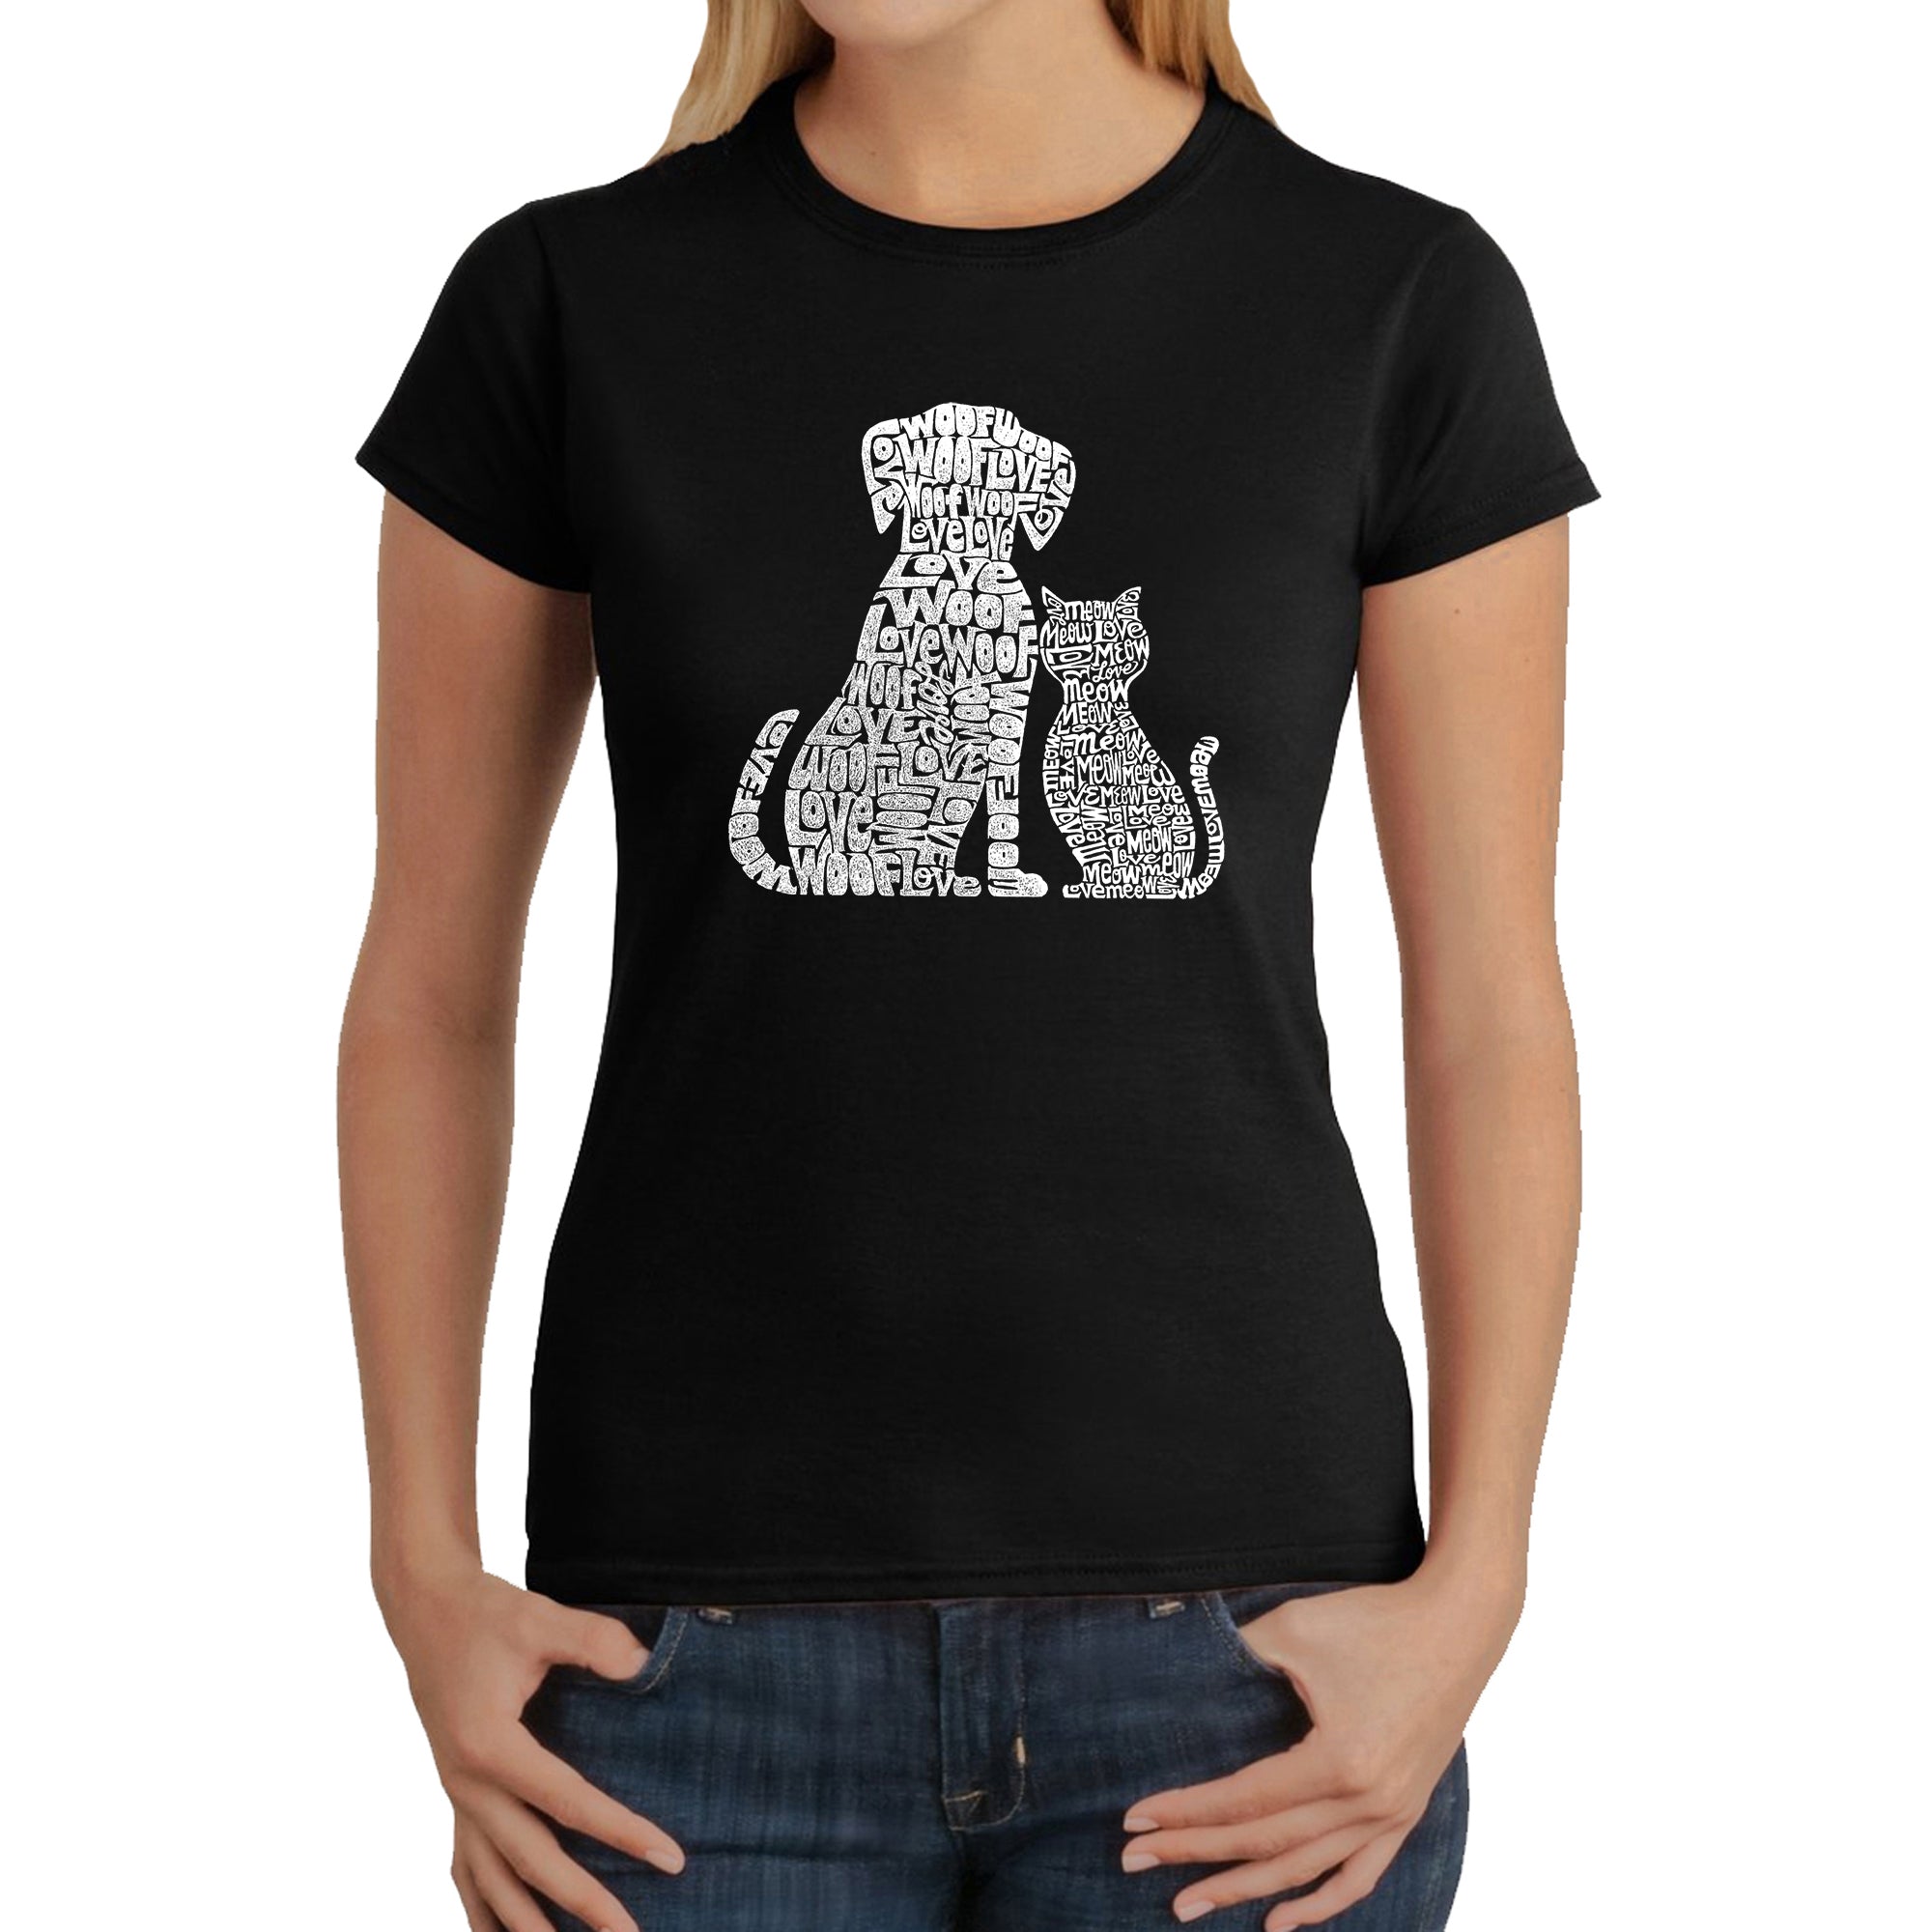 Dogs And Cats - Women's Word Art T-Shirt - Black - XX-Large